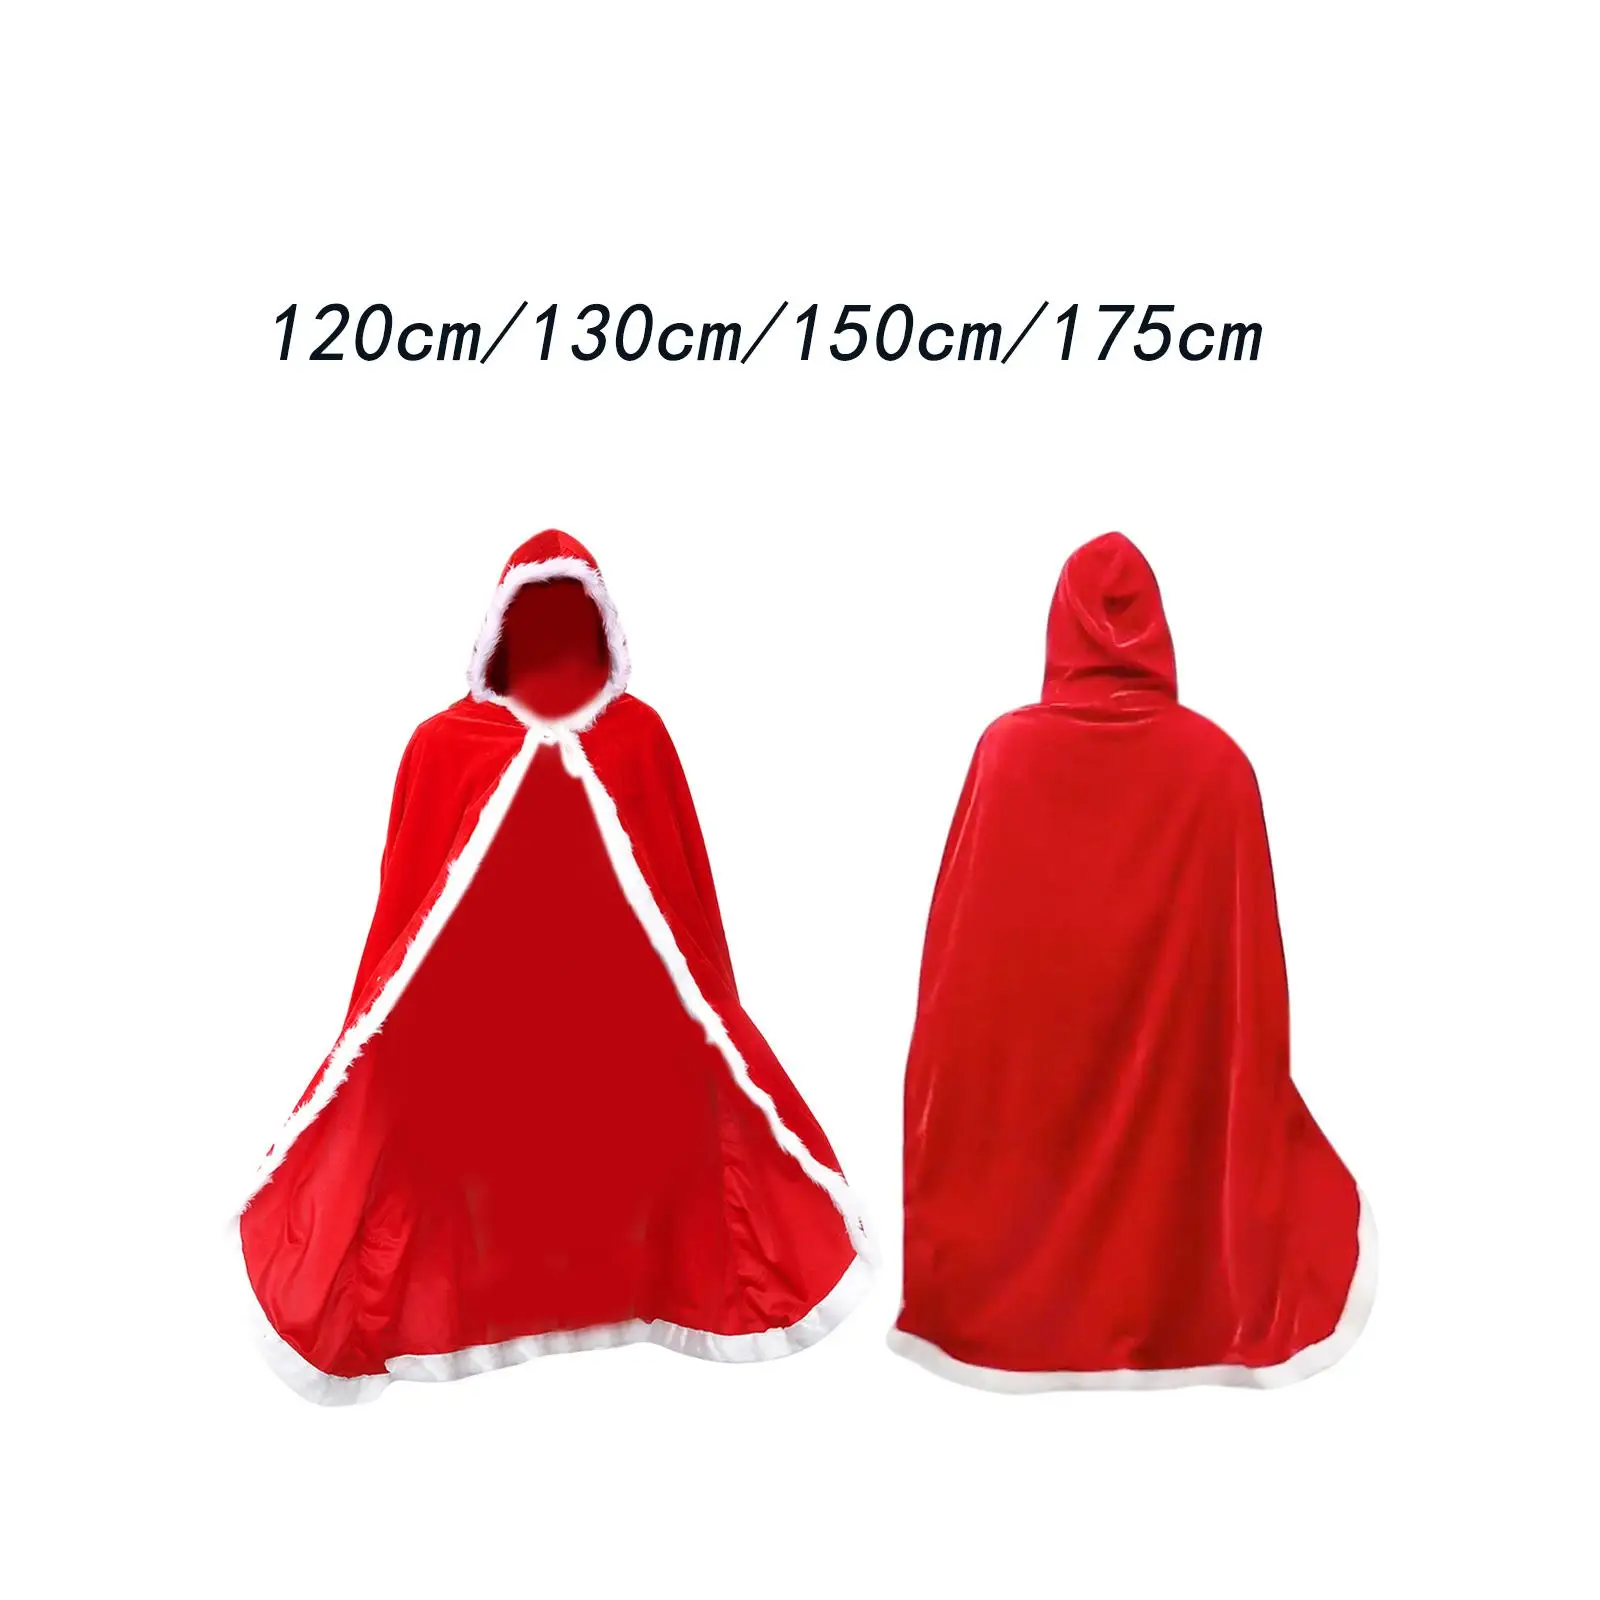 

Christmas Long Hooded Cloak Cape Cosplay Multifunctional Soft Skin Friendly Fabric Lightweight Accessories for Dress up Party